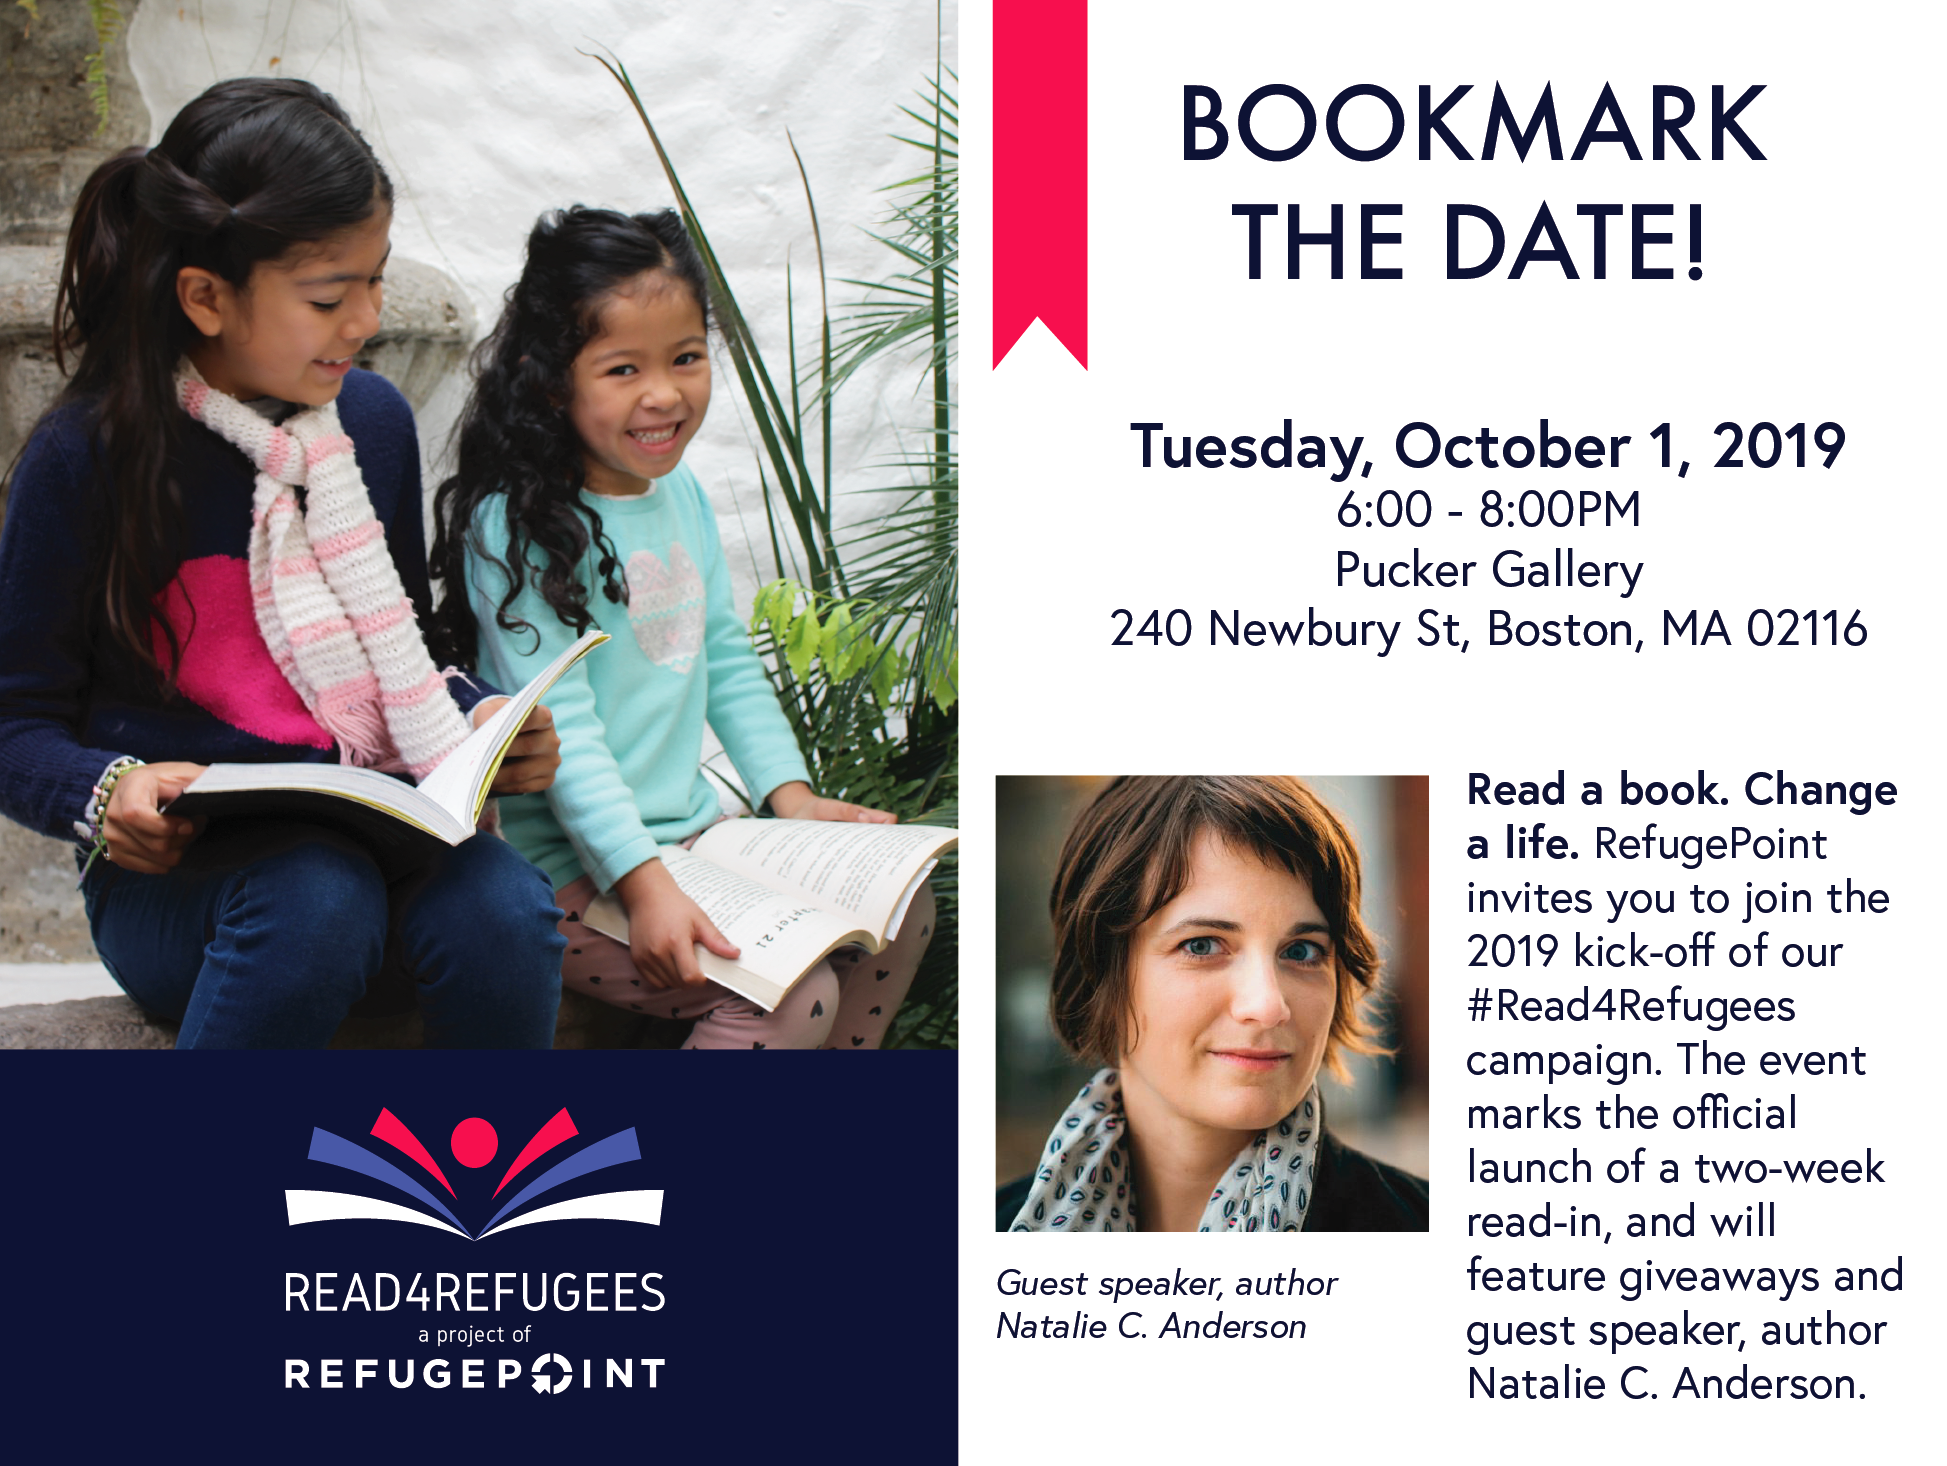 You are invited: October 1! Read a book. Change a life.